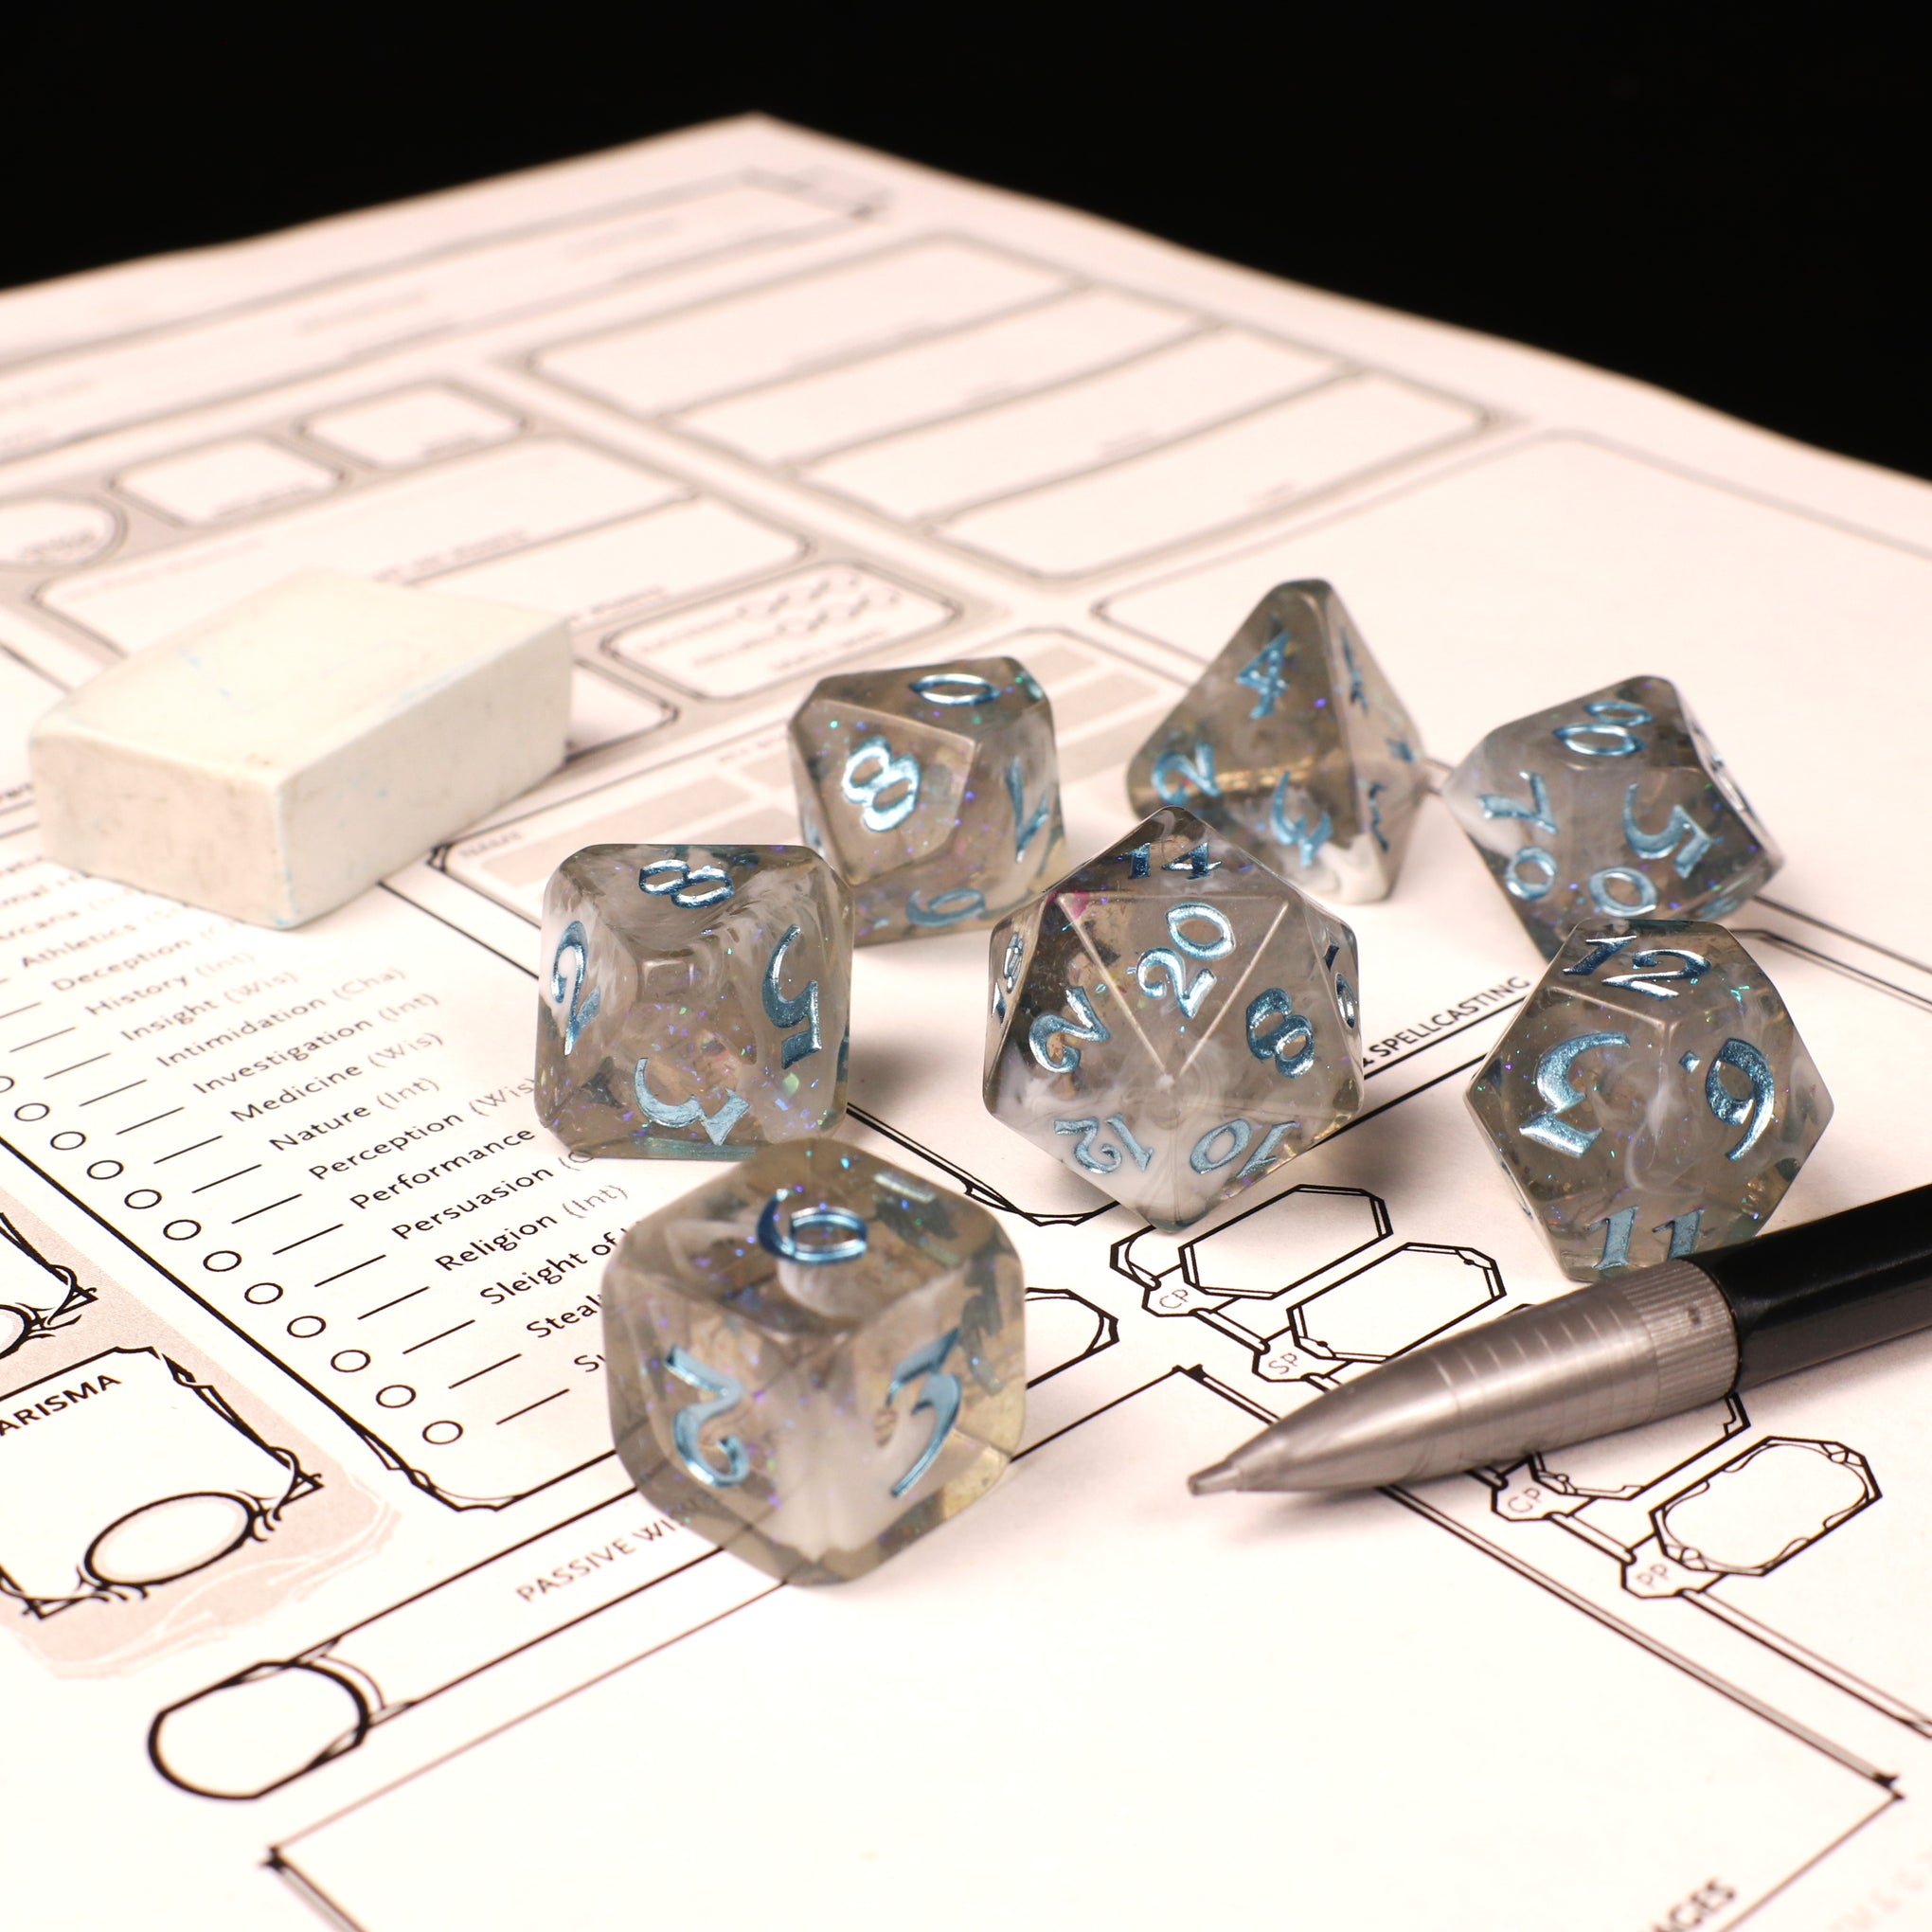 Hale's Guide] What is a D20? – The Shop of Many Things